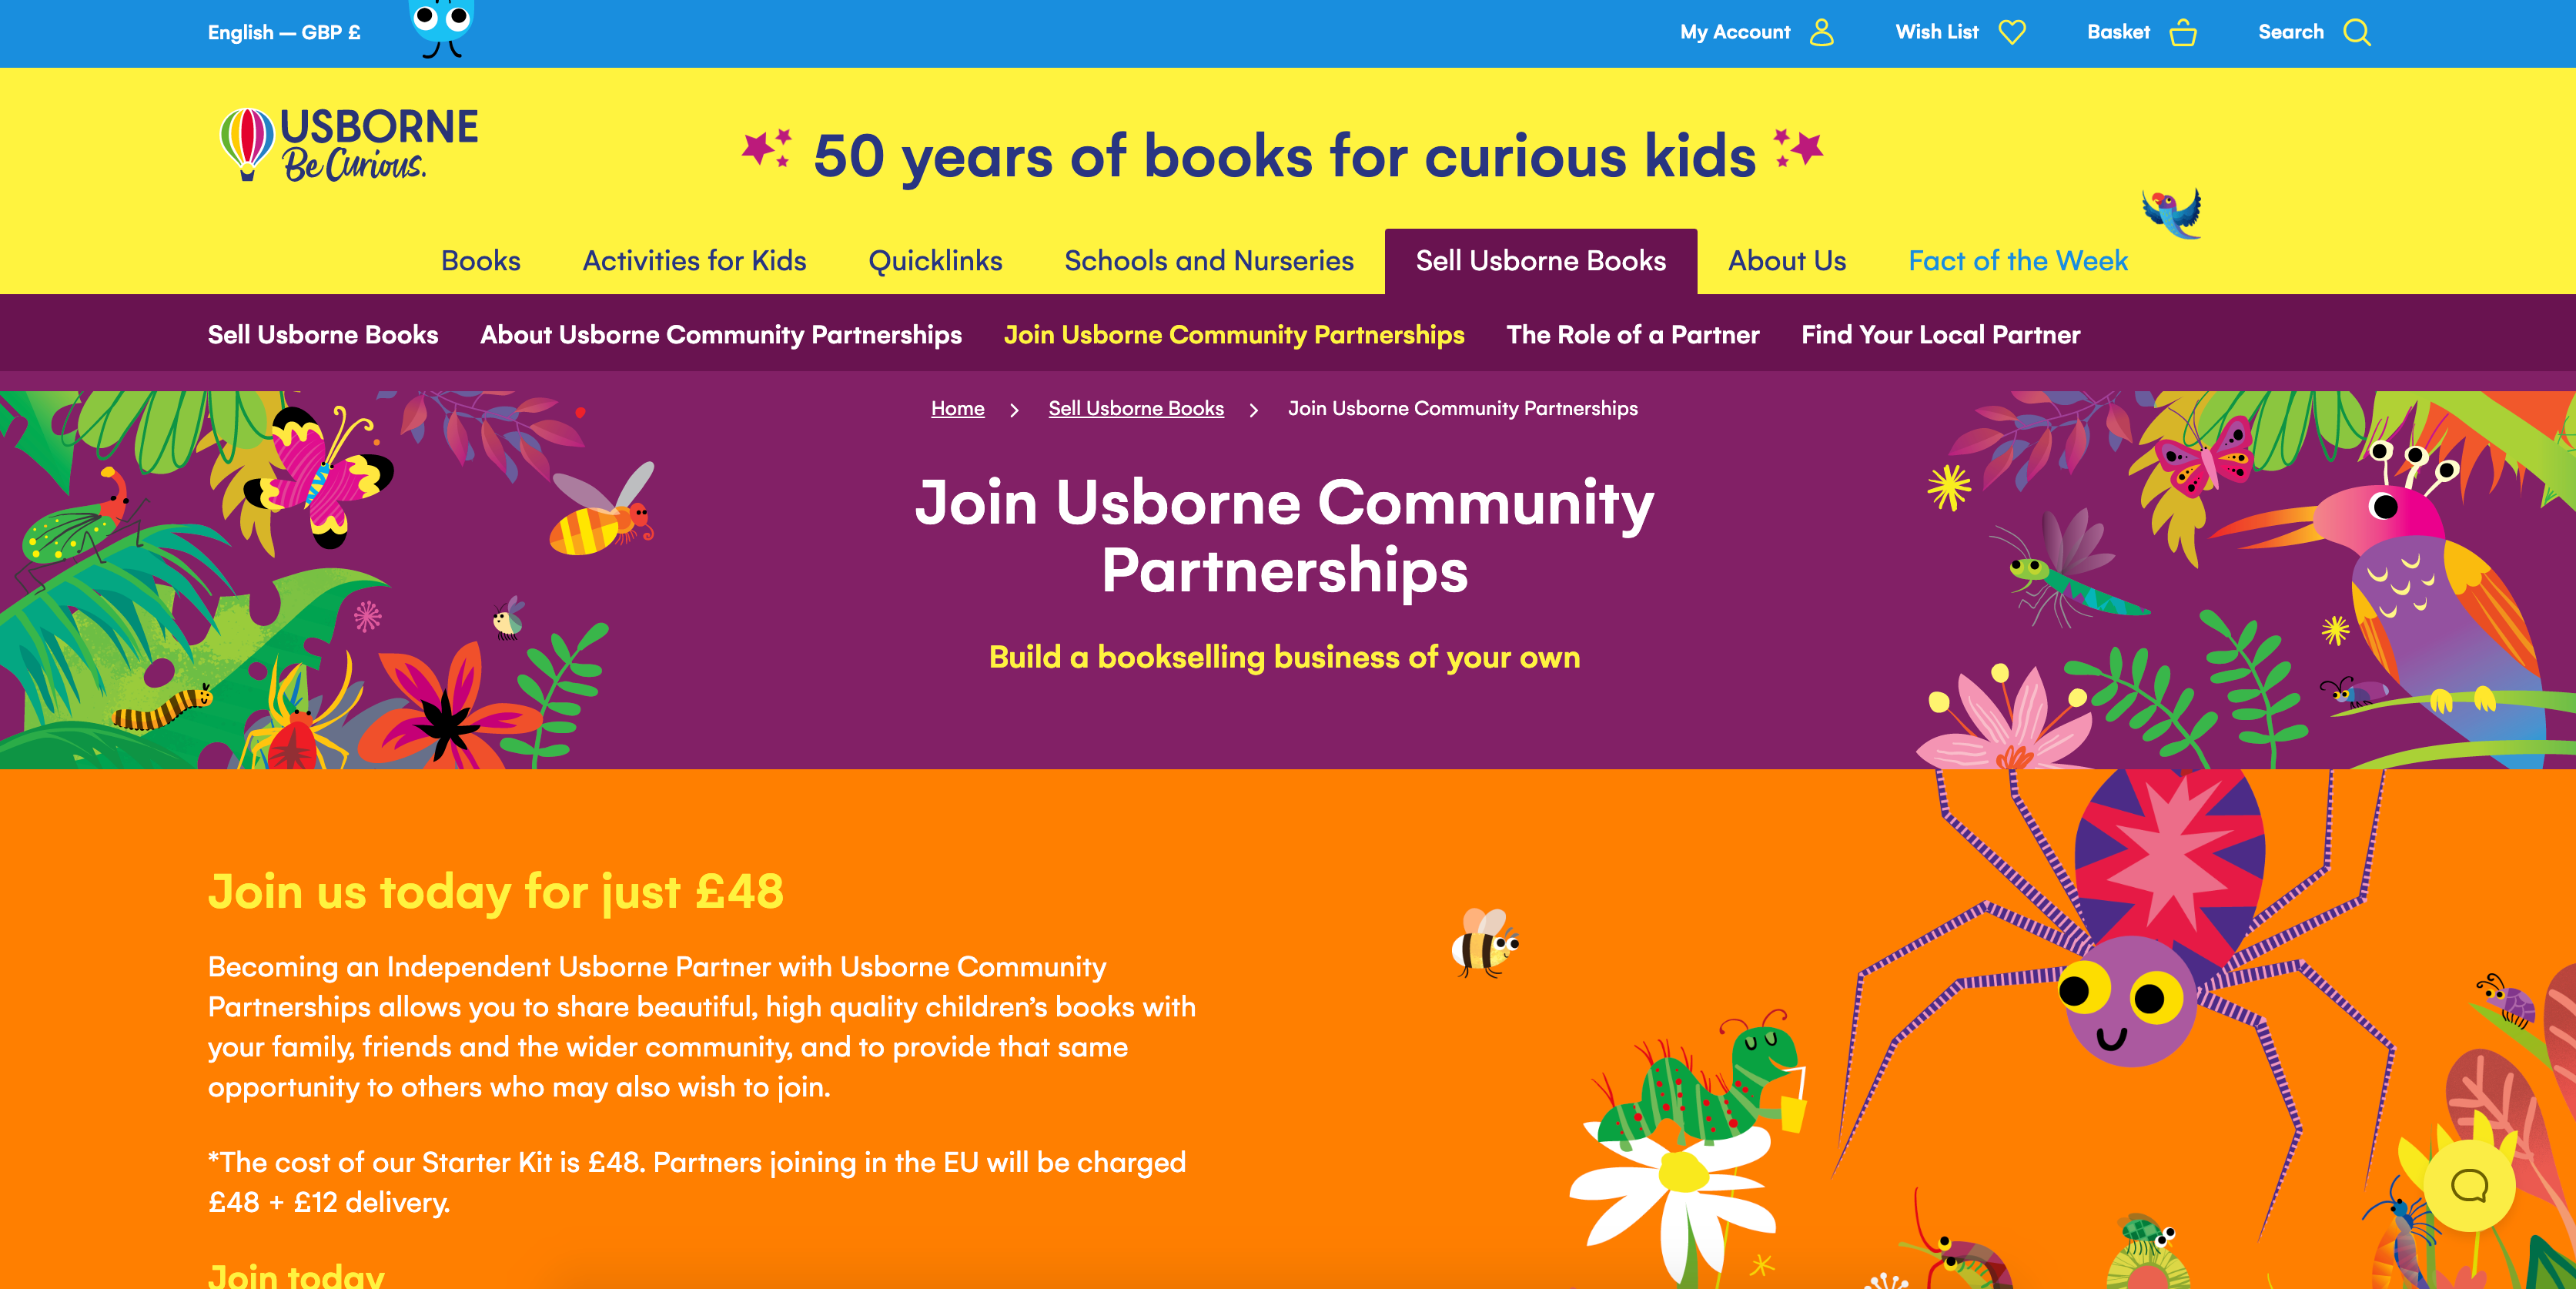 This company offers several different starter kits - make more money as direct sellers with Usborne Books